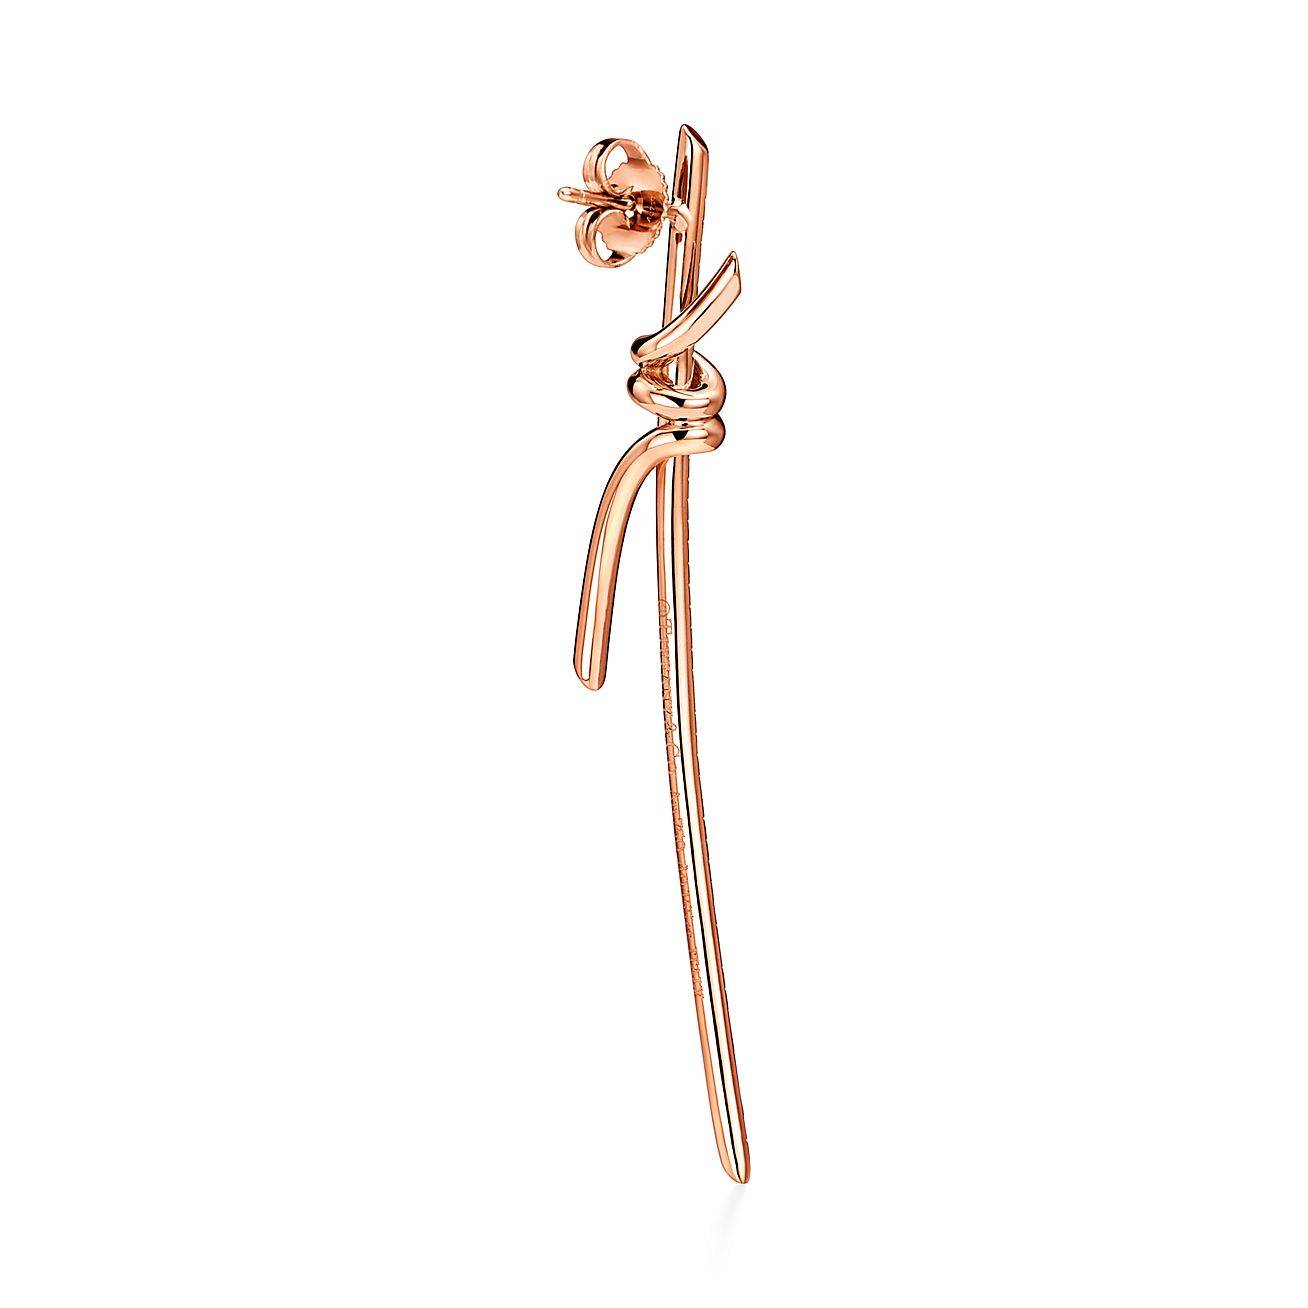 TIFFANY KNOT DROP EARRINGS IN ROSE GOLD WITH DIAMONDS